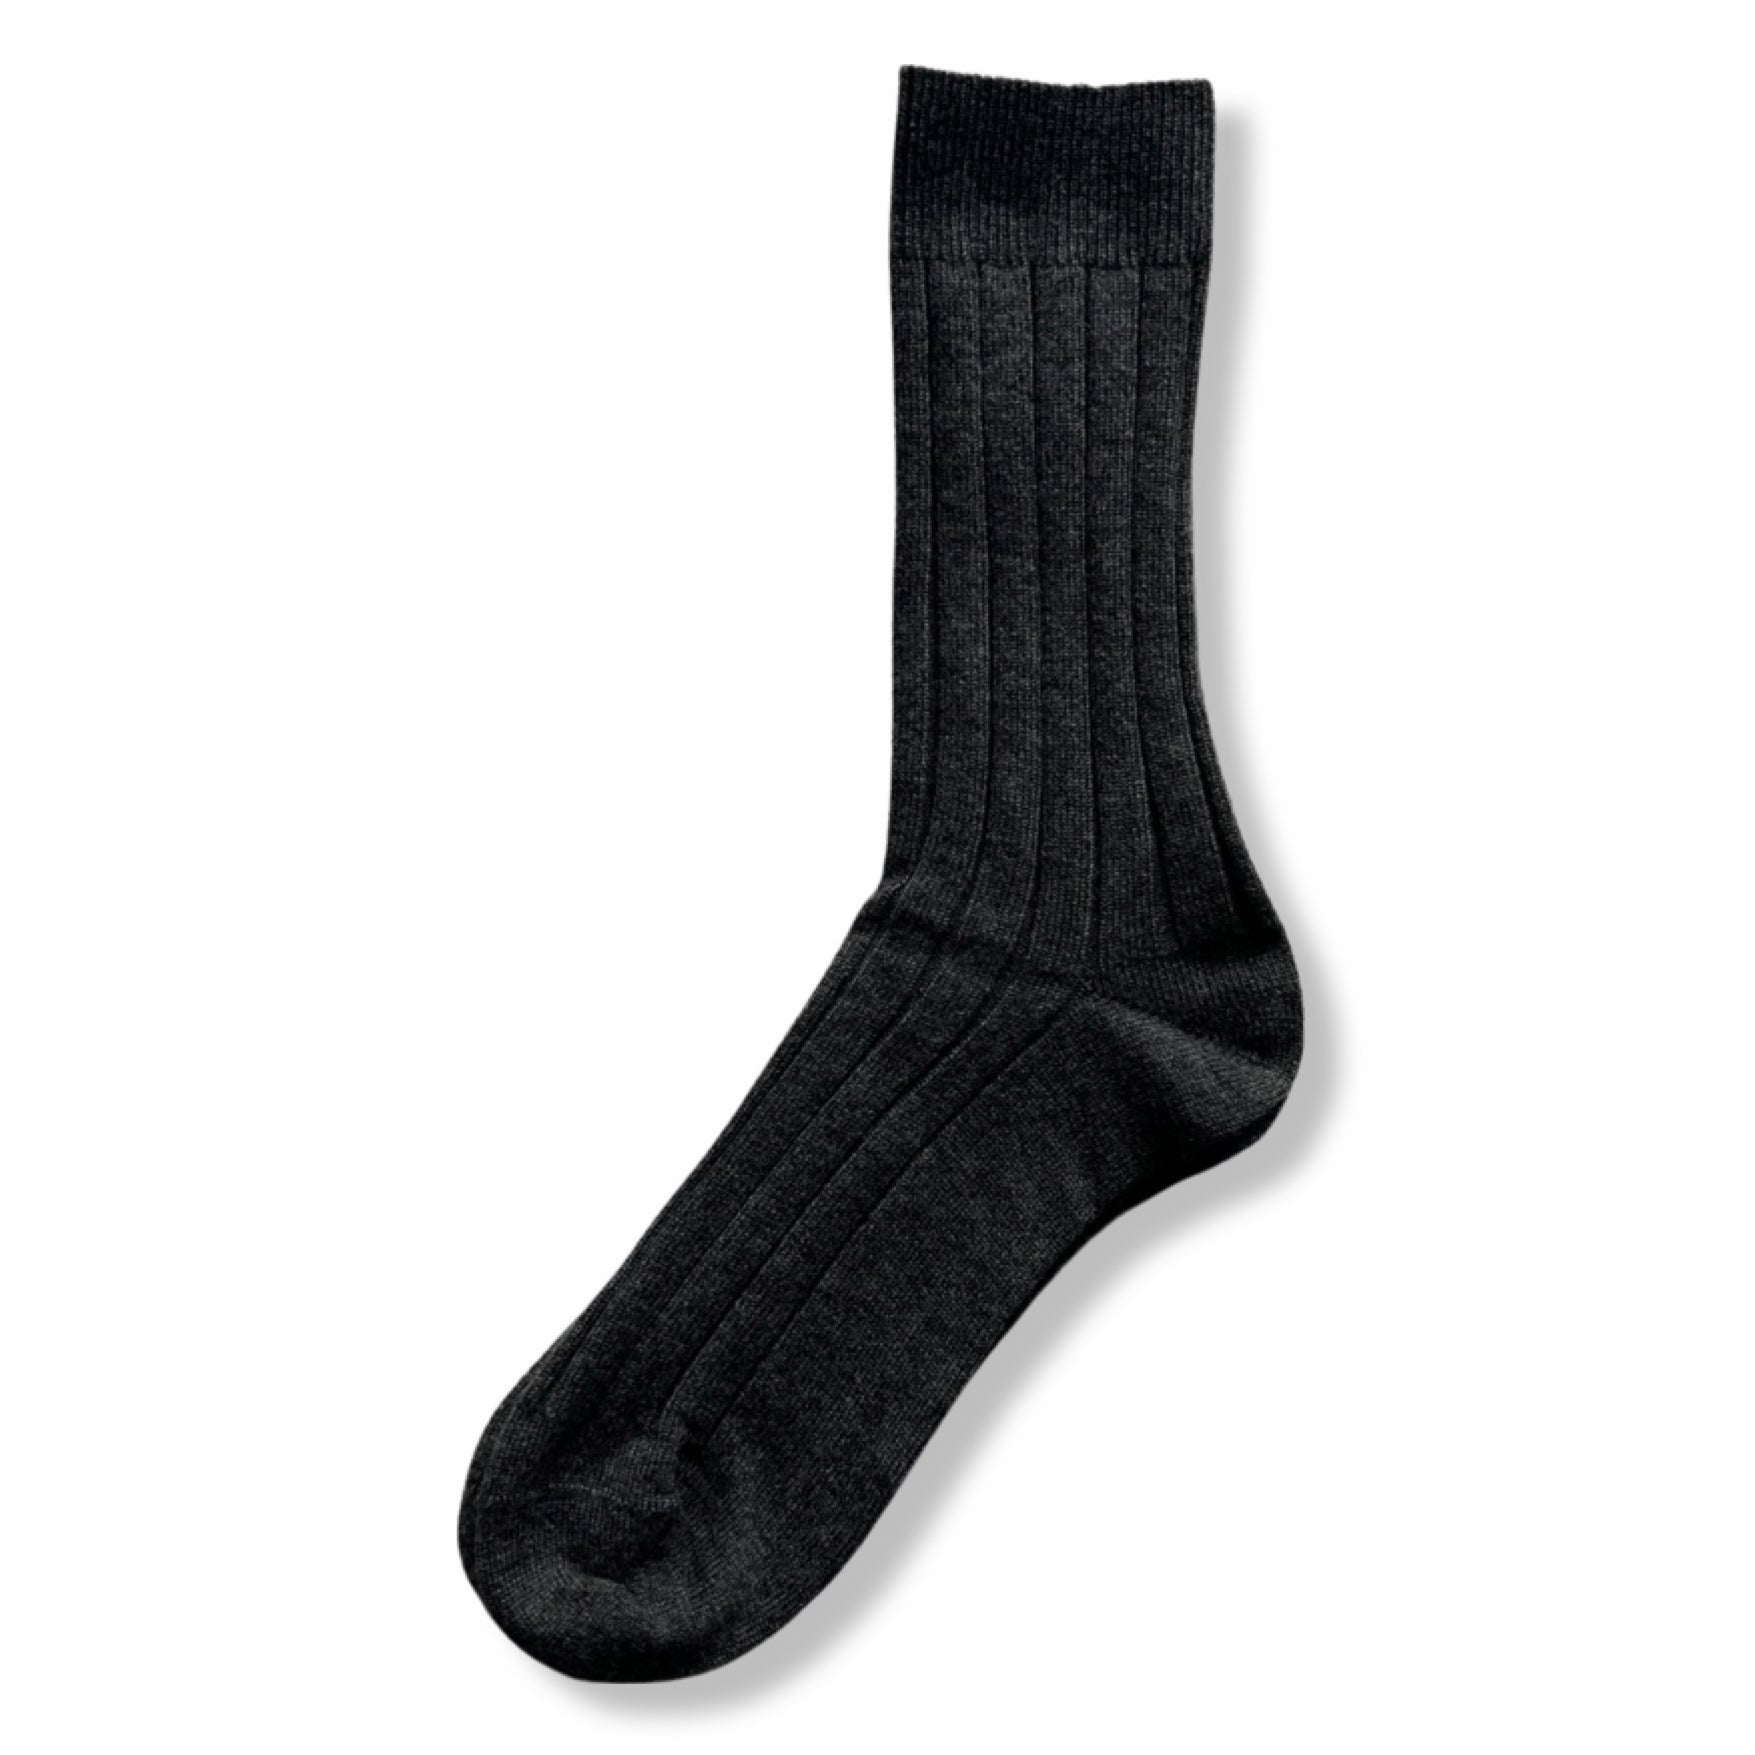 Ribbed Cashmere Socks, Scarves, Hickman & Bousfied - Hickman & Bousfield, Safari and Travel Clothing